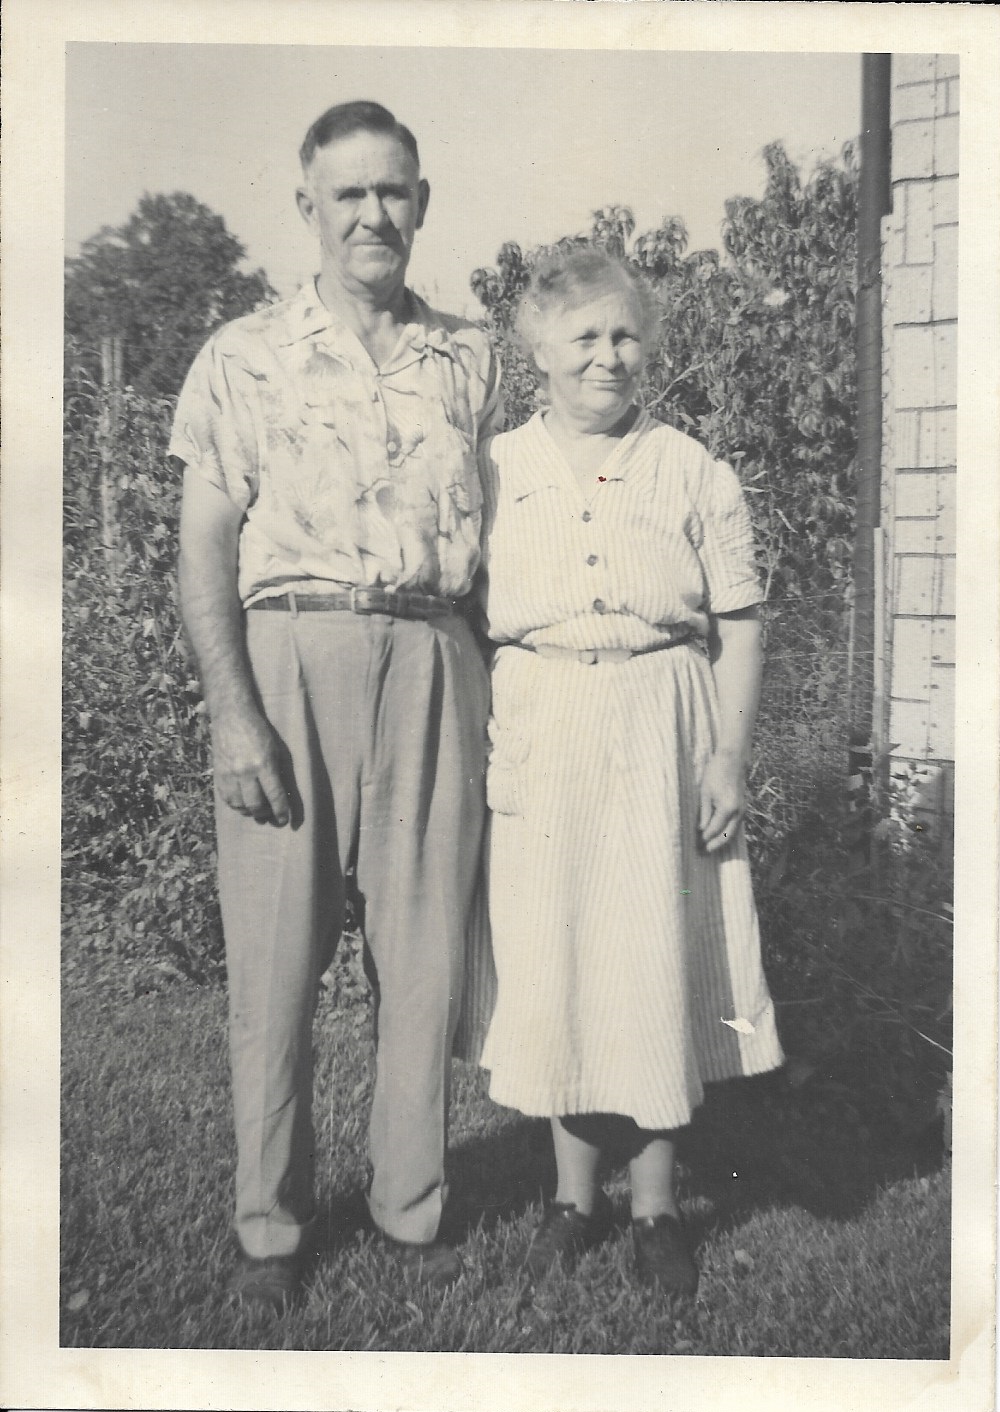 My great-grandmother Idella with her husband Harold